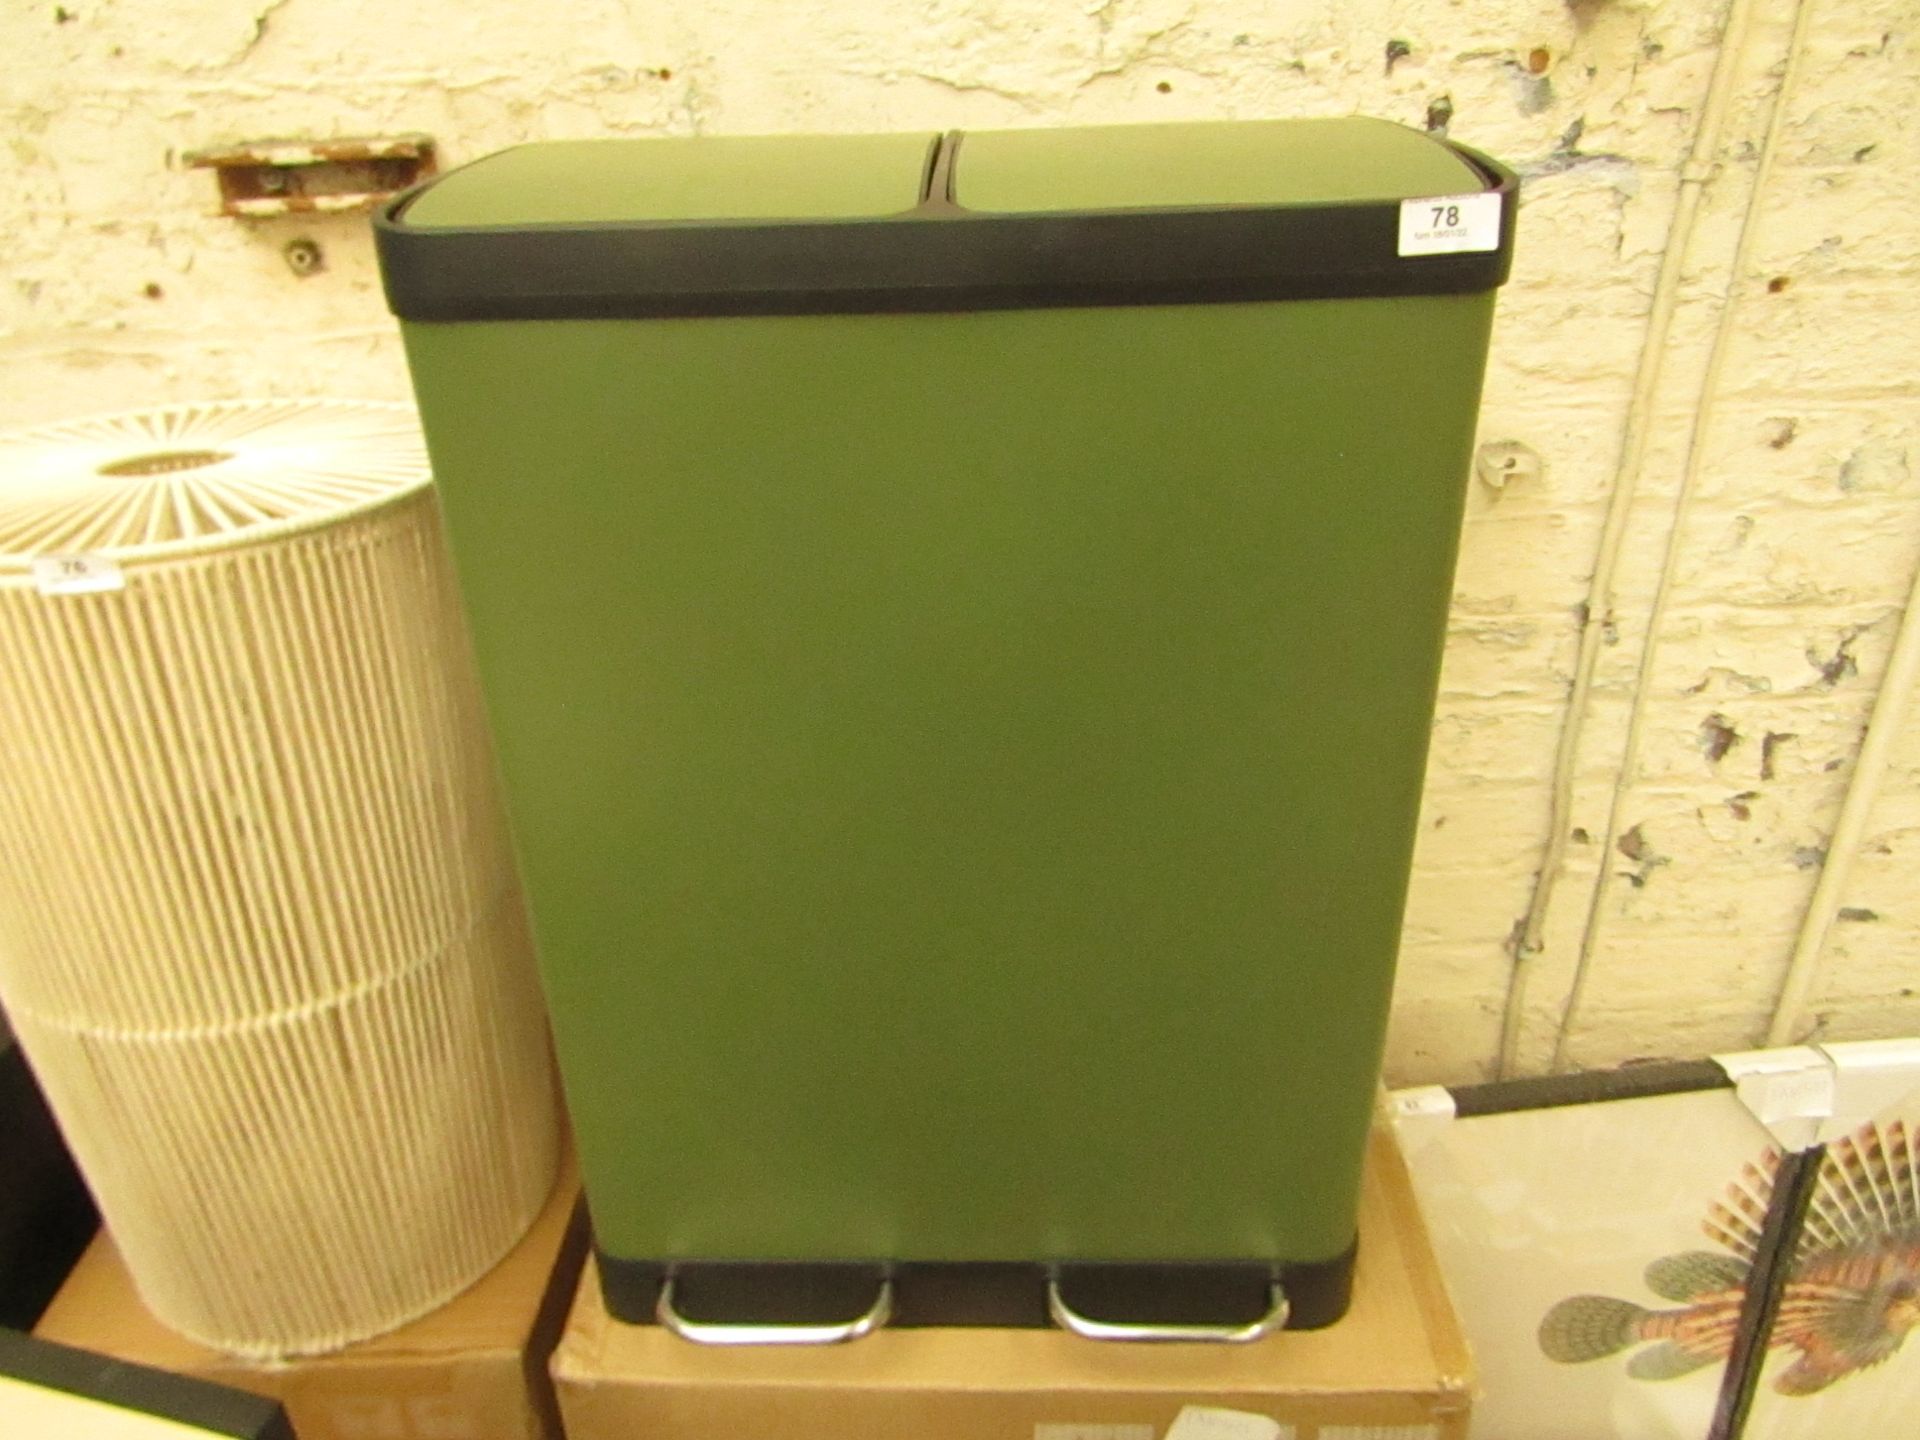 1 x Made.com Colter 60L Soft Close Double Recycling Pedal Bin x2 30L Forest Green RRP £69 SKU MAD-